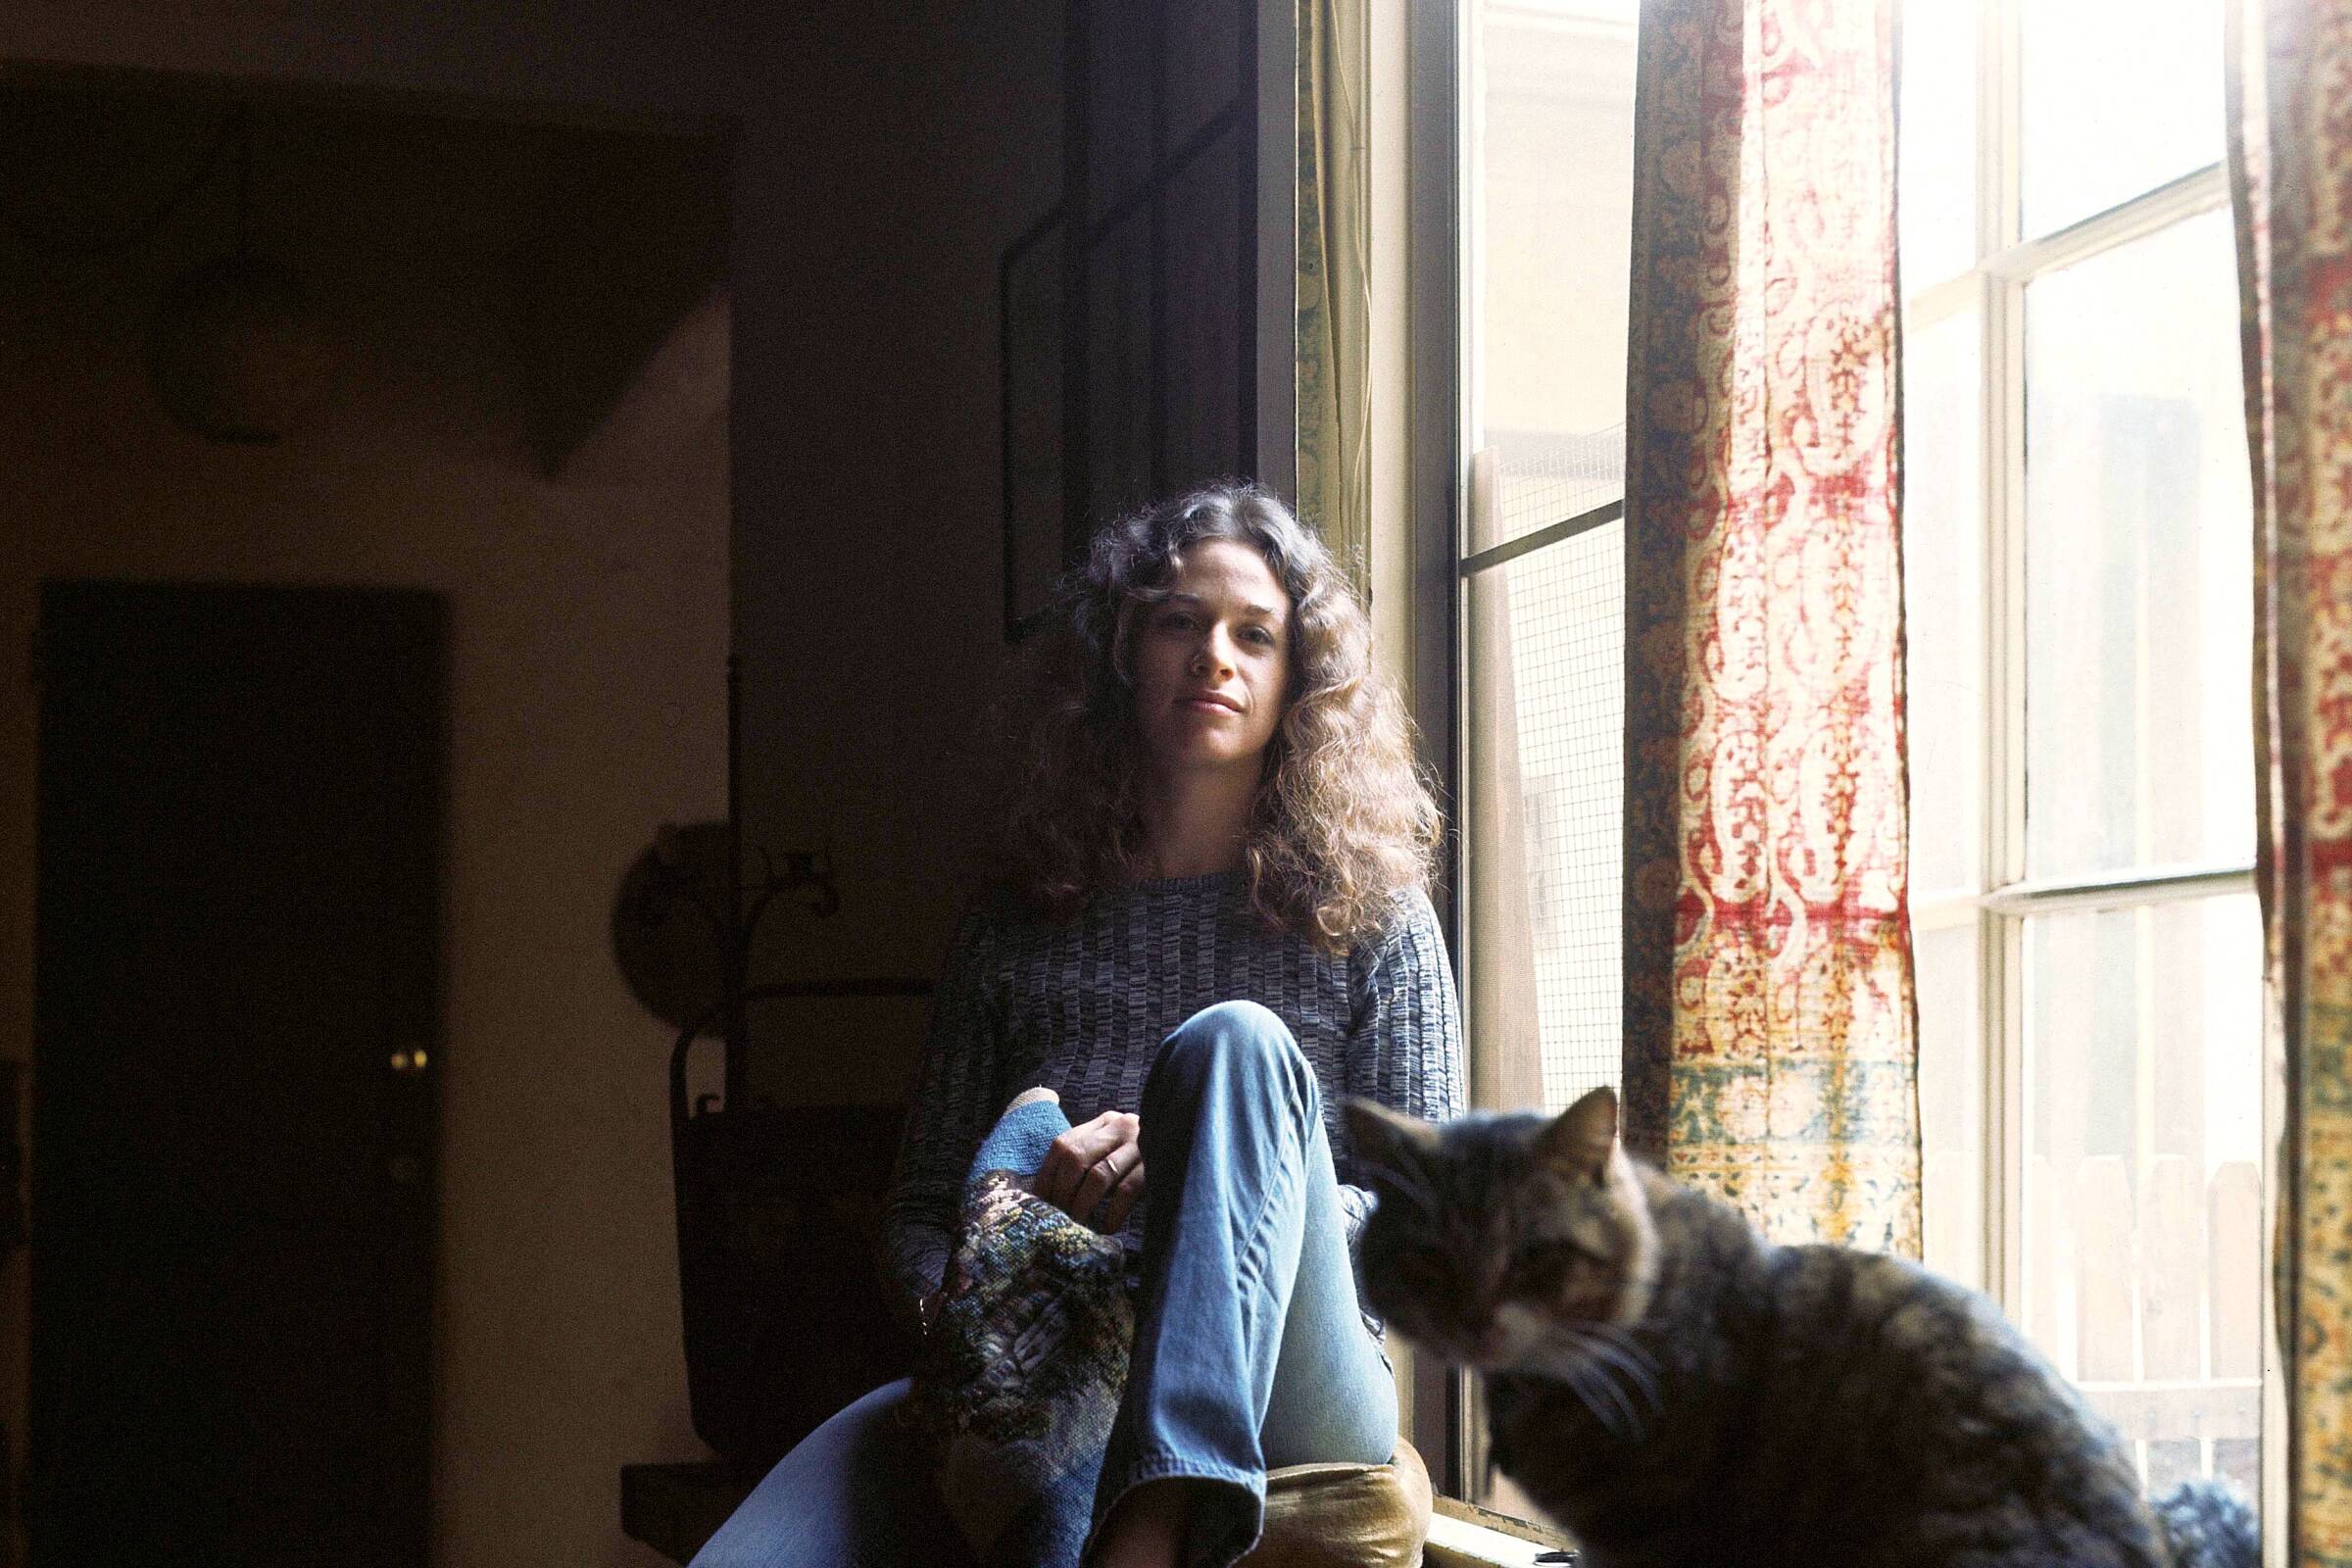 Carole King and her friend Telemachus during the photo shoot for the "Tapestry" album cover.